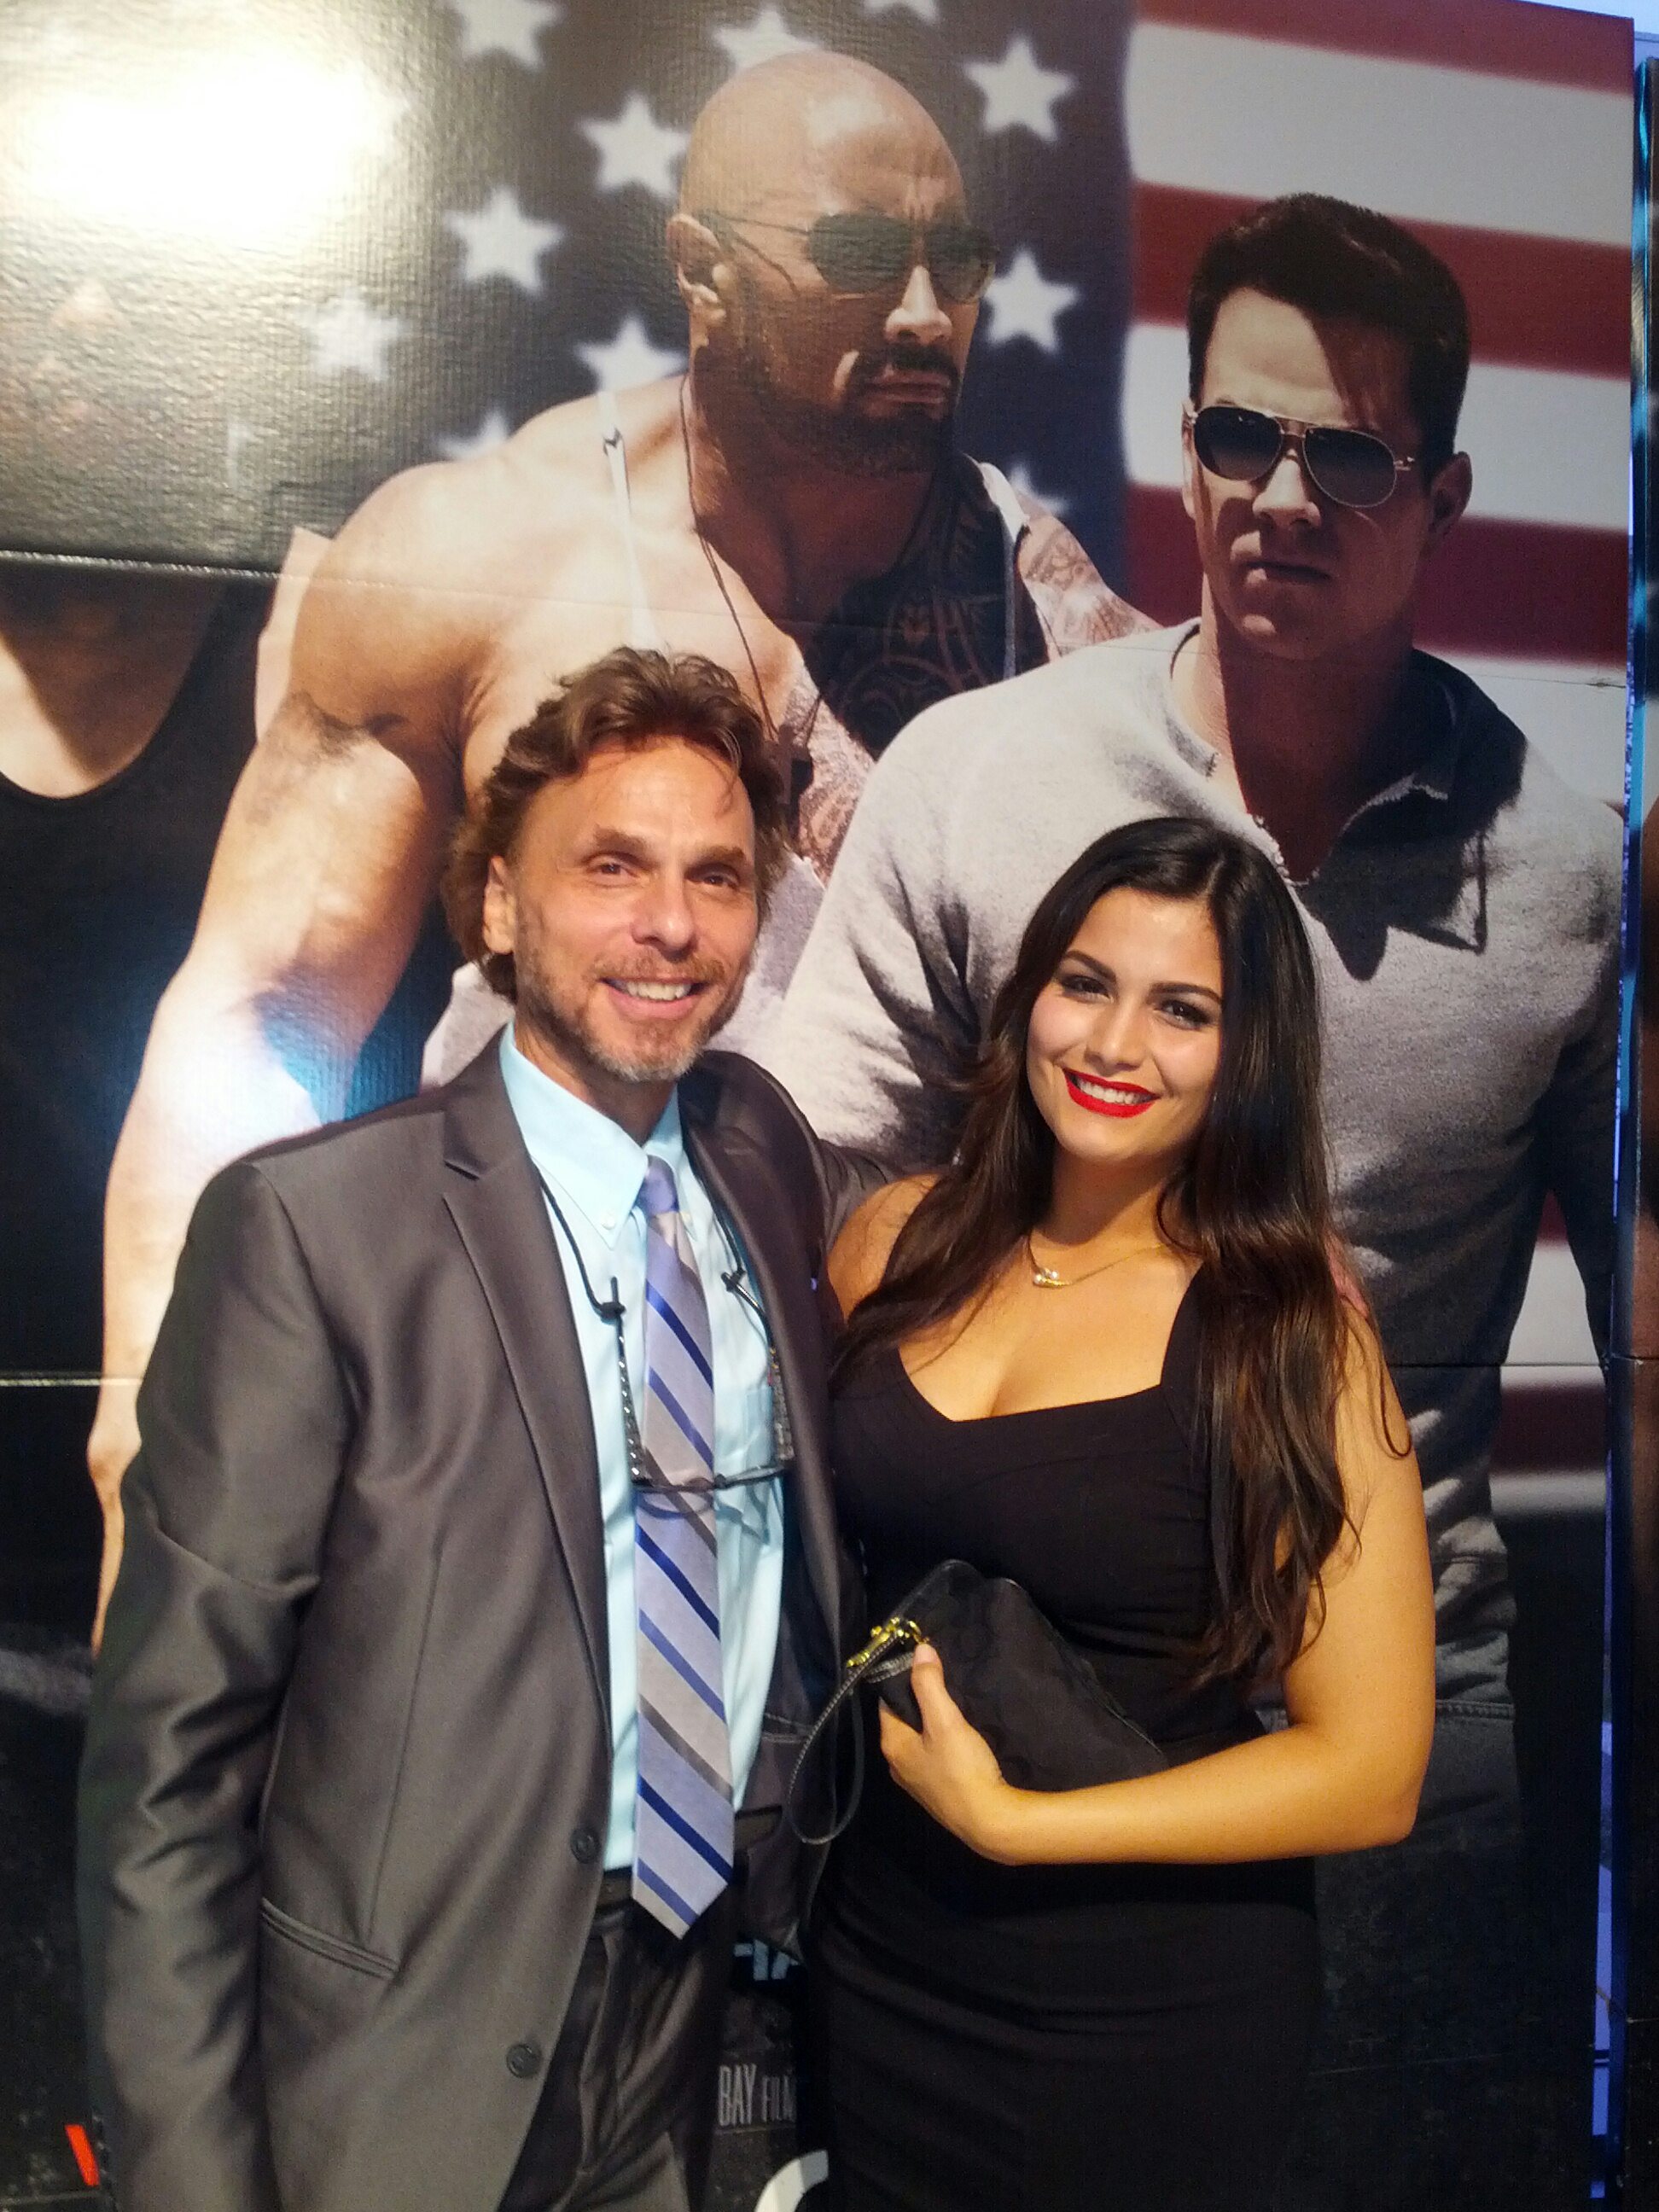 Keith Schwabinger with Persi Caputo Actress Pain and Gain as Judy the Slotsky Deli Girl, Premiere Miami Beach